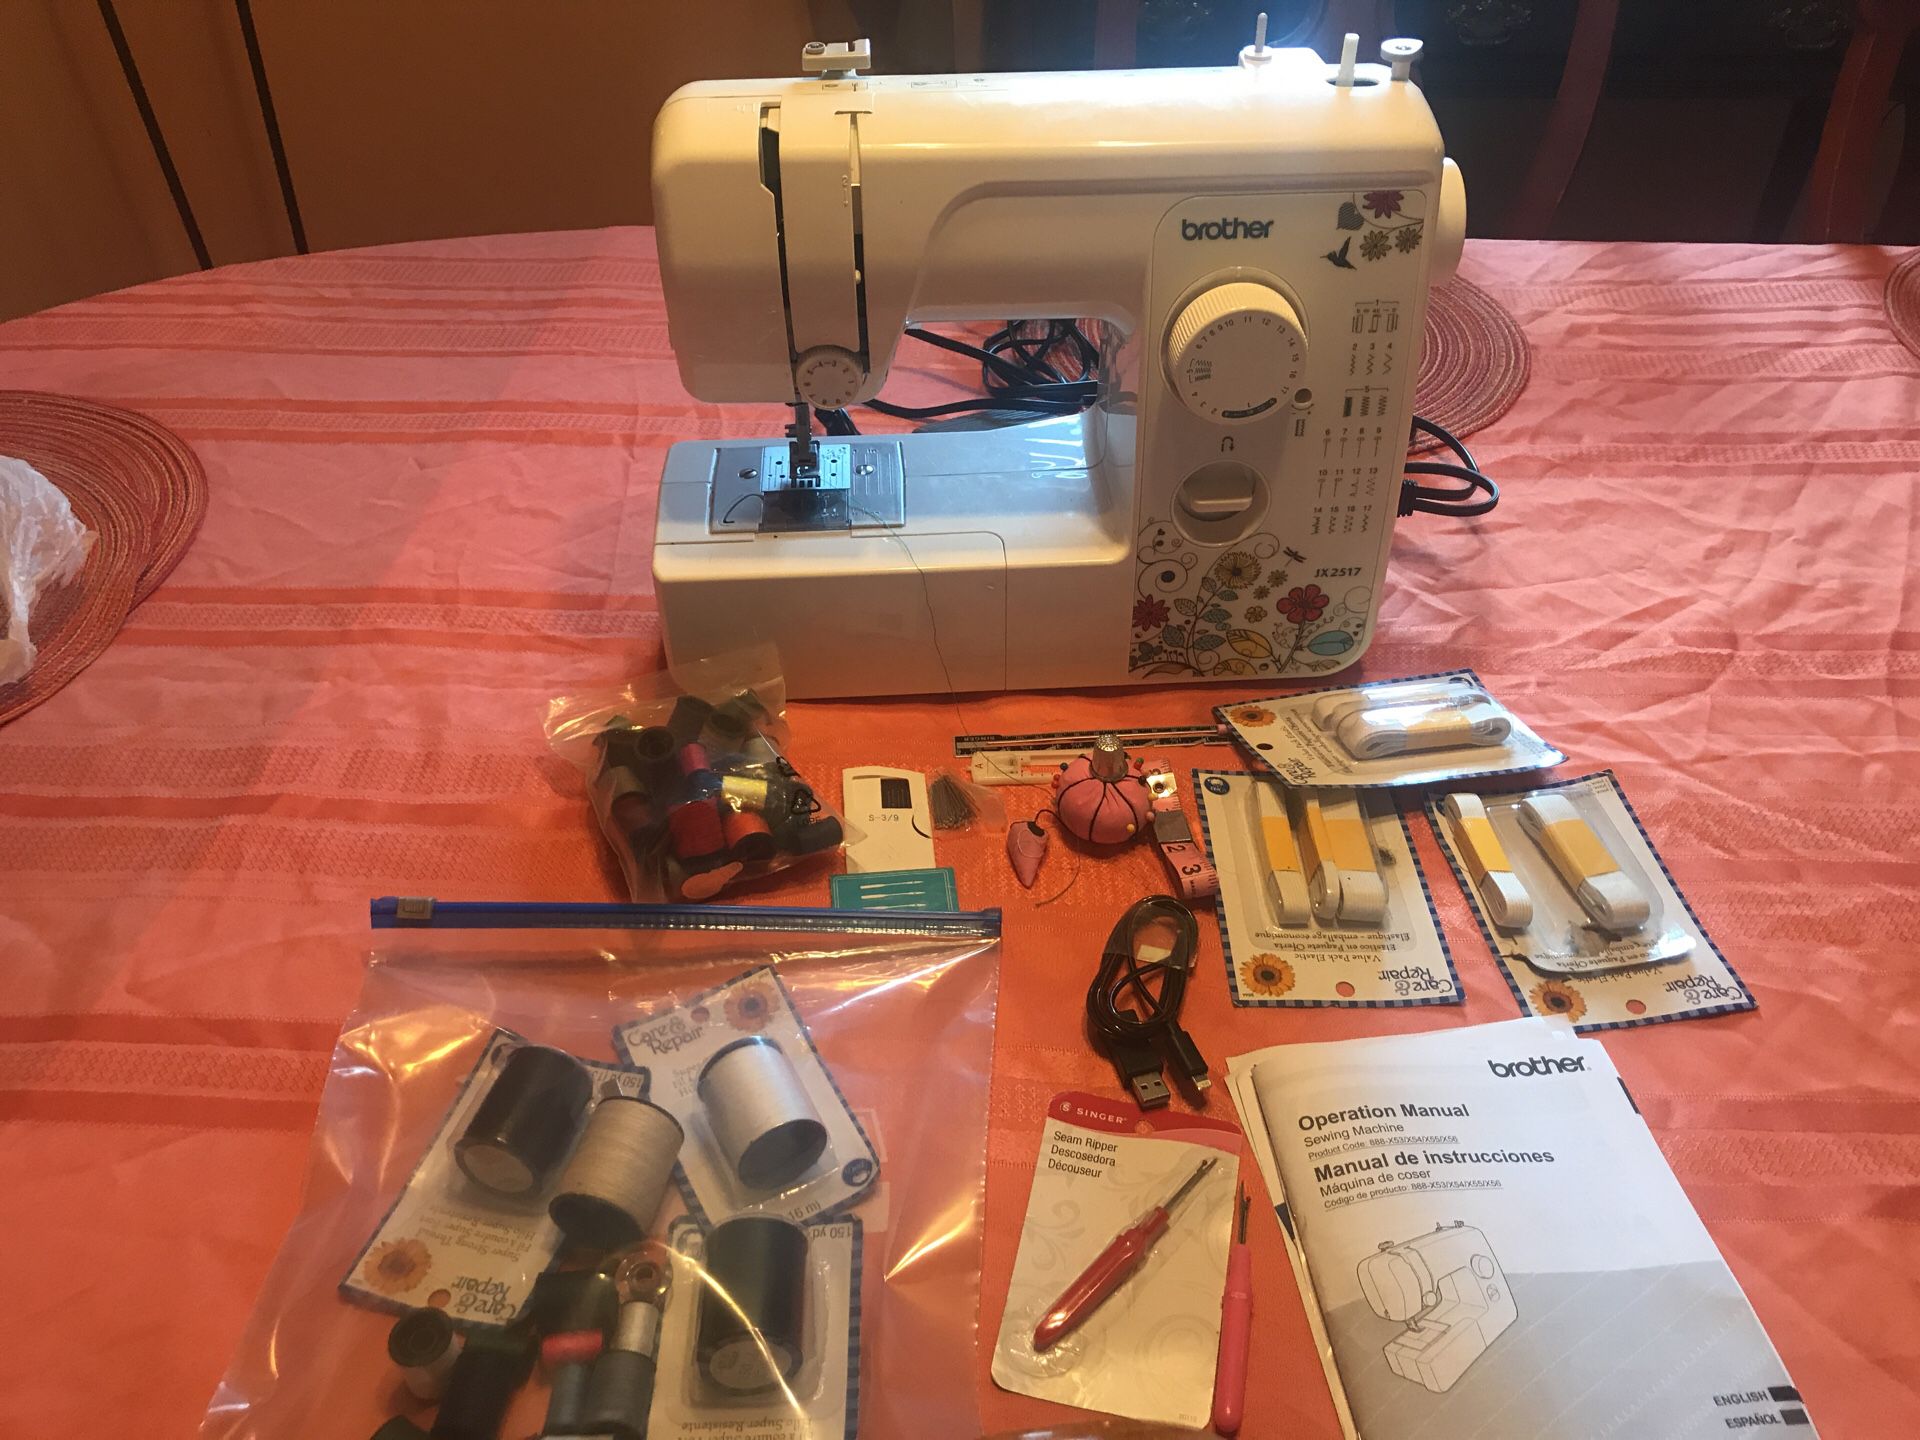 Brother sewing machine used only 2 times: has bobbin winder,thread guide,quick set bobbin,and many other gadgets. Comes with original instruction boo